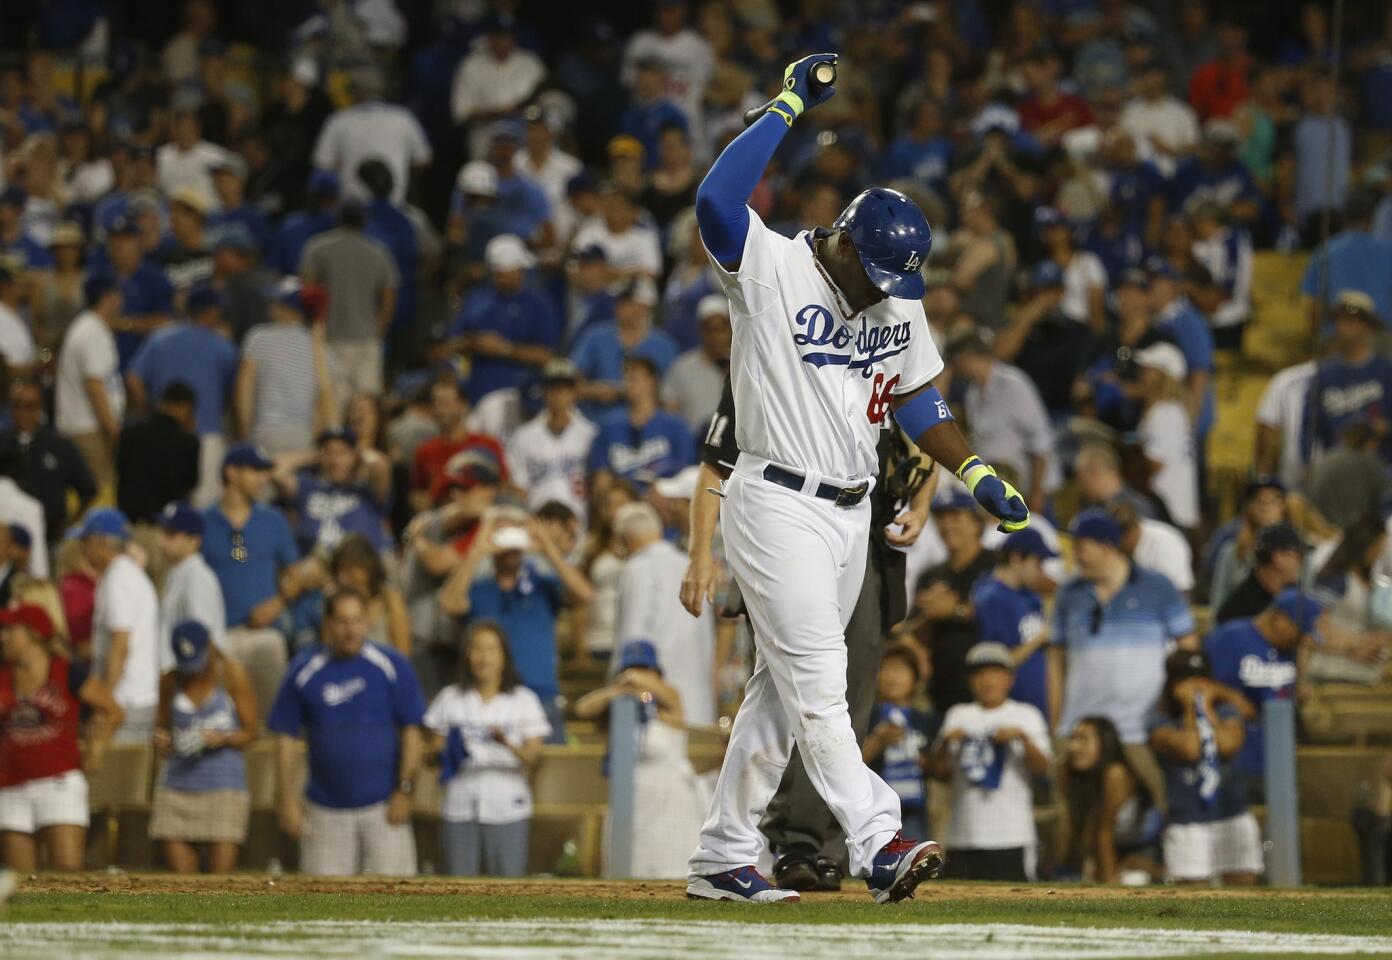 Dodgers center fielder Yasiel Puig reacts after striking out with the tying run at third base to end the game against the Cardinals on Friday night at Dodger Stadium.